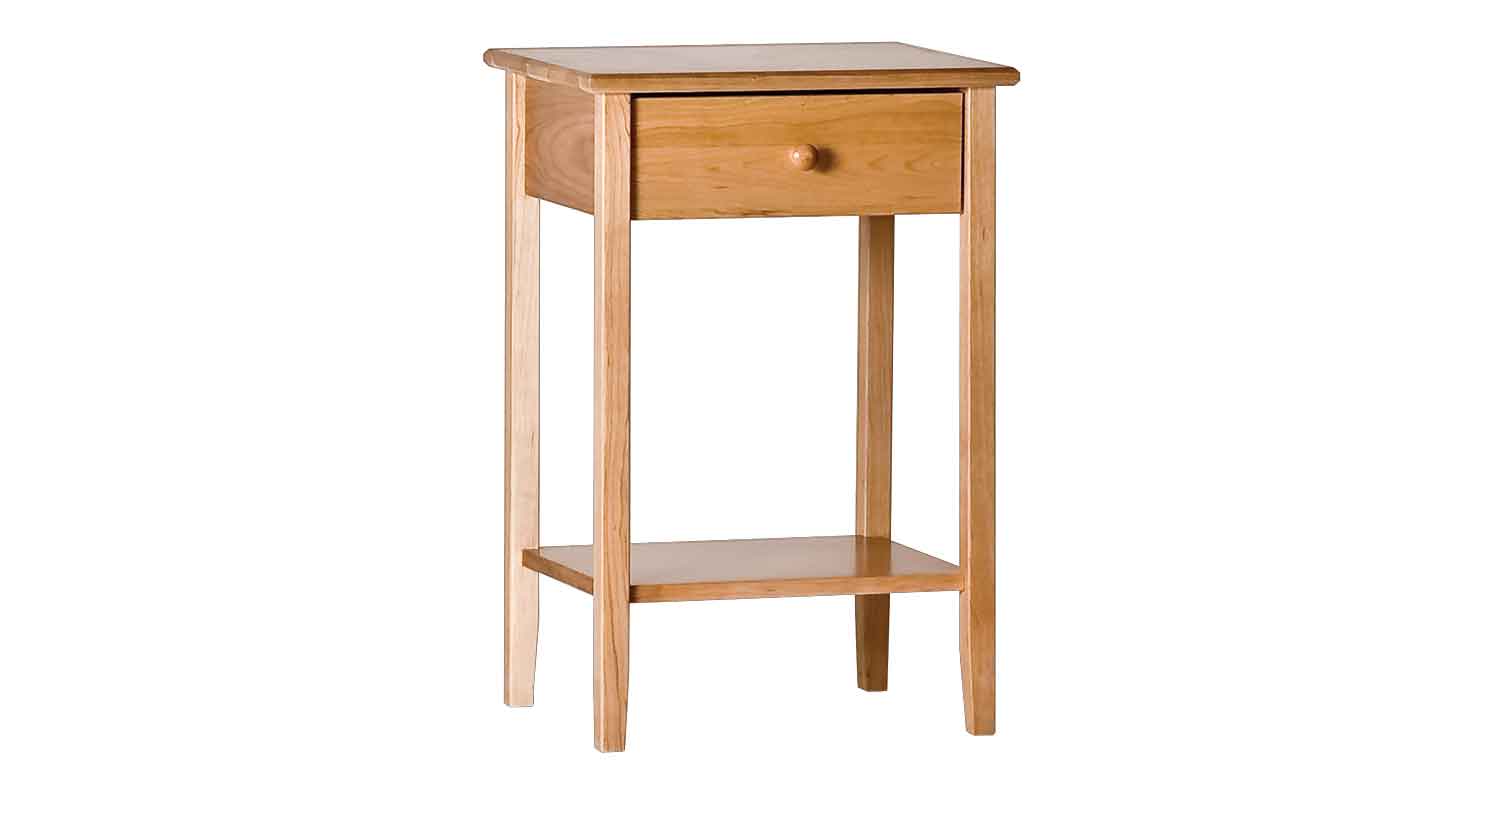 circle furniture shaker tall side table accent tables with drawer marble cocktail round nightstand cordless bedside lamps narrow tray dining small poolside outdoor set west elm